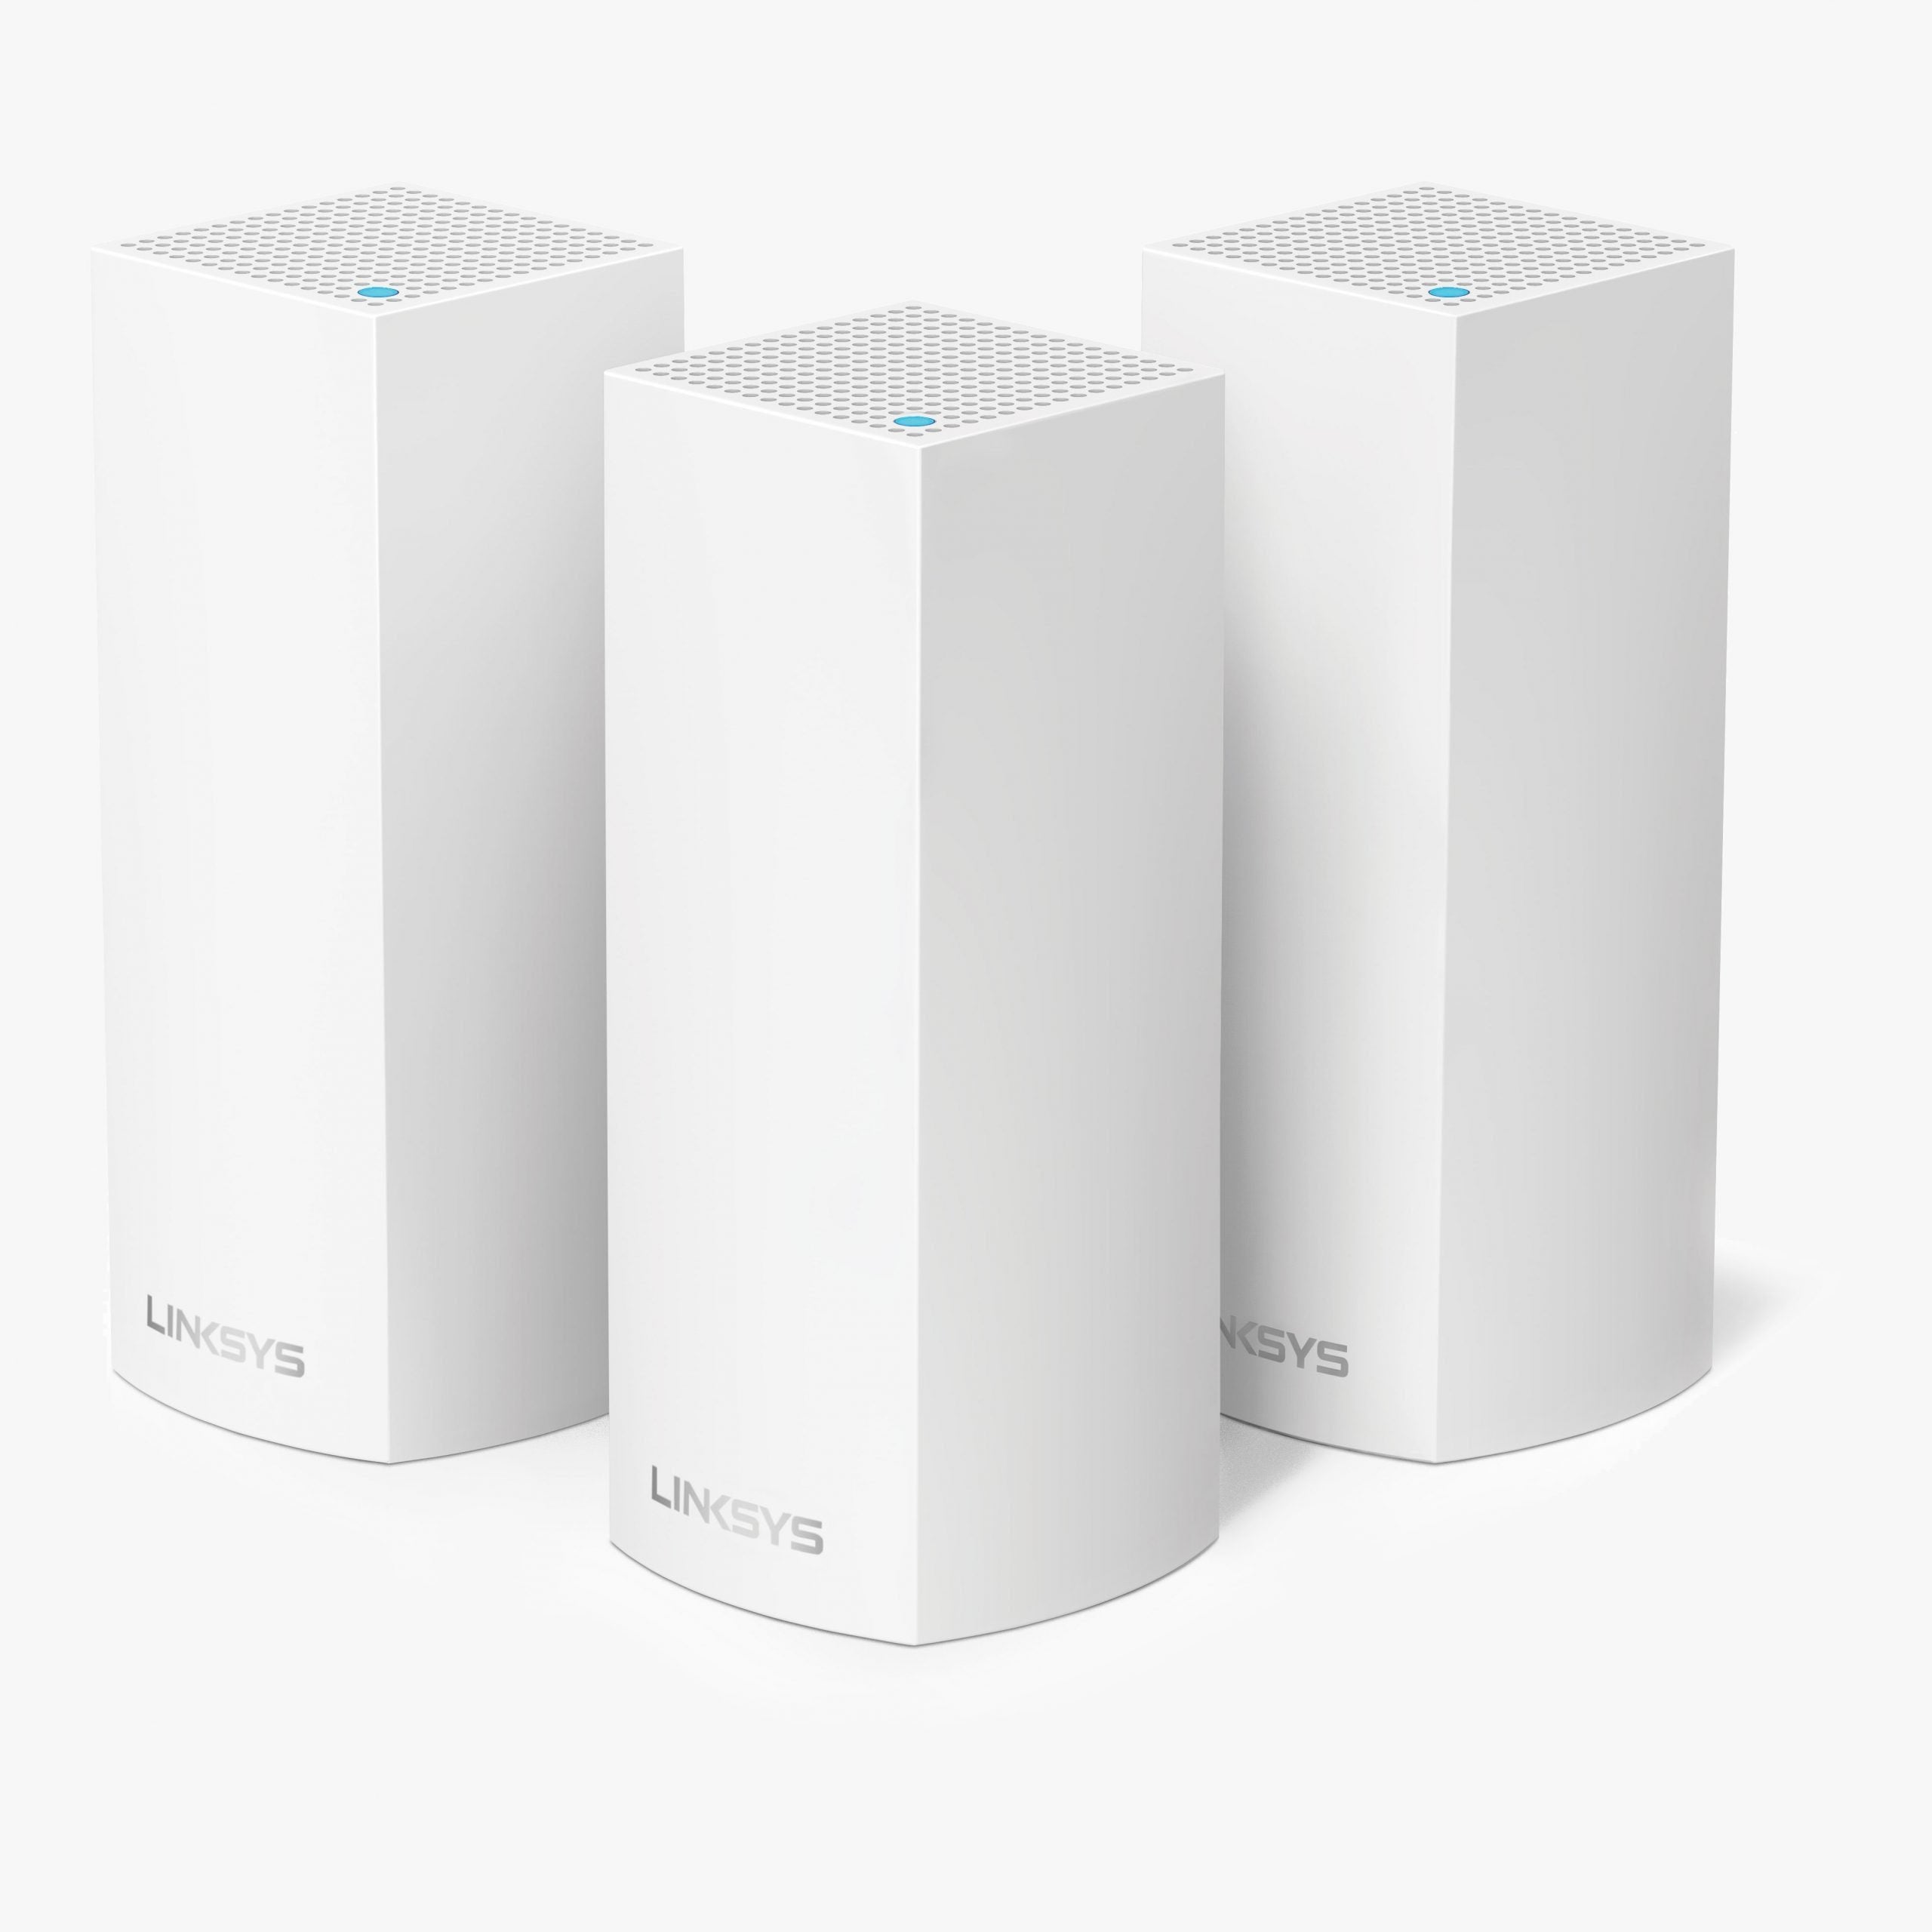 Linksys WHW0303 Velop Tri-Band Wireless Mesh Router (3-Pack)